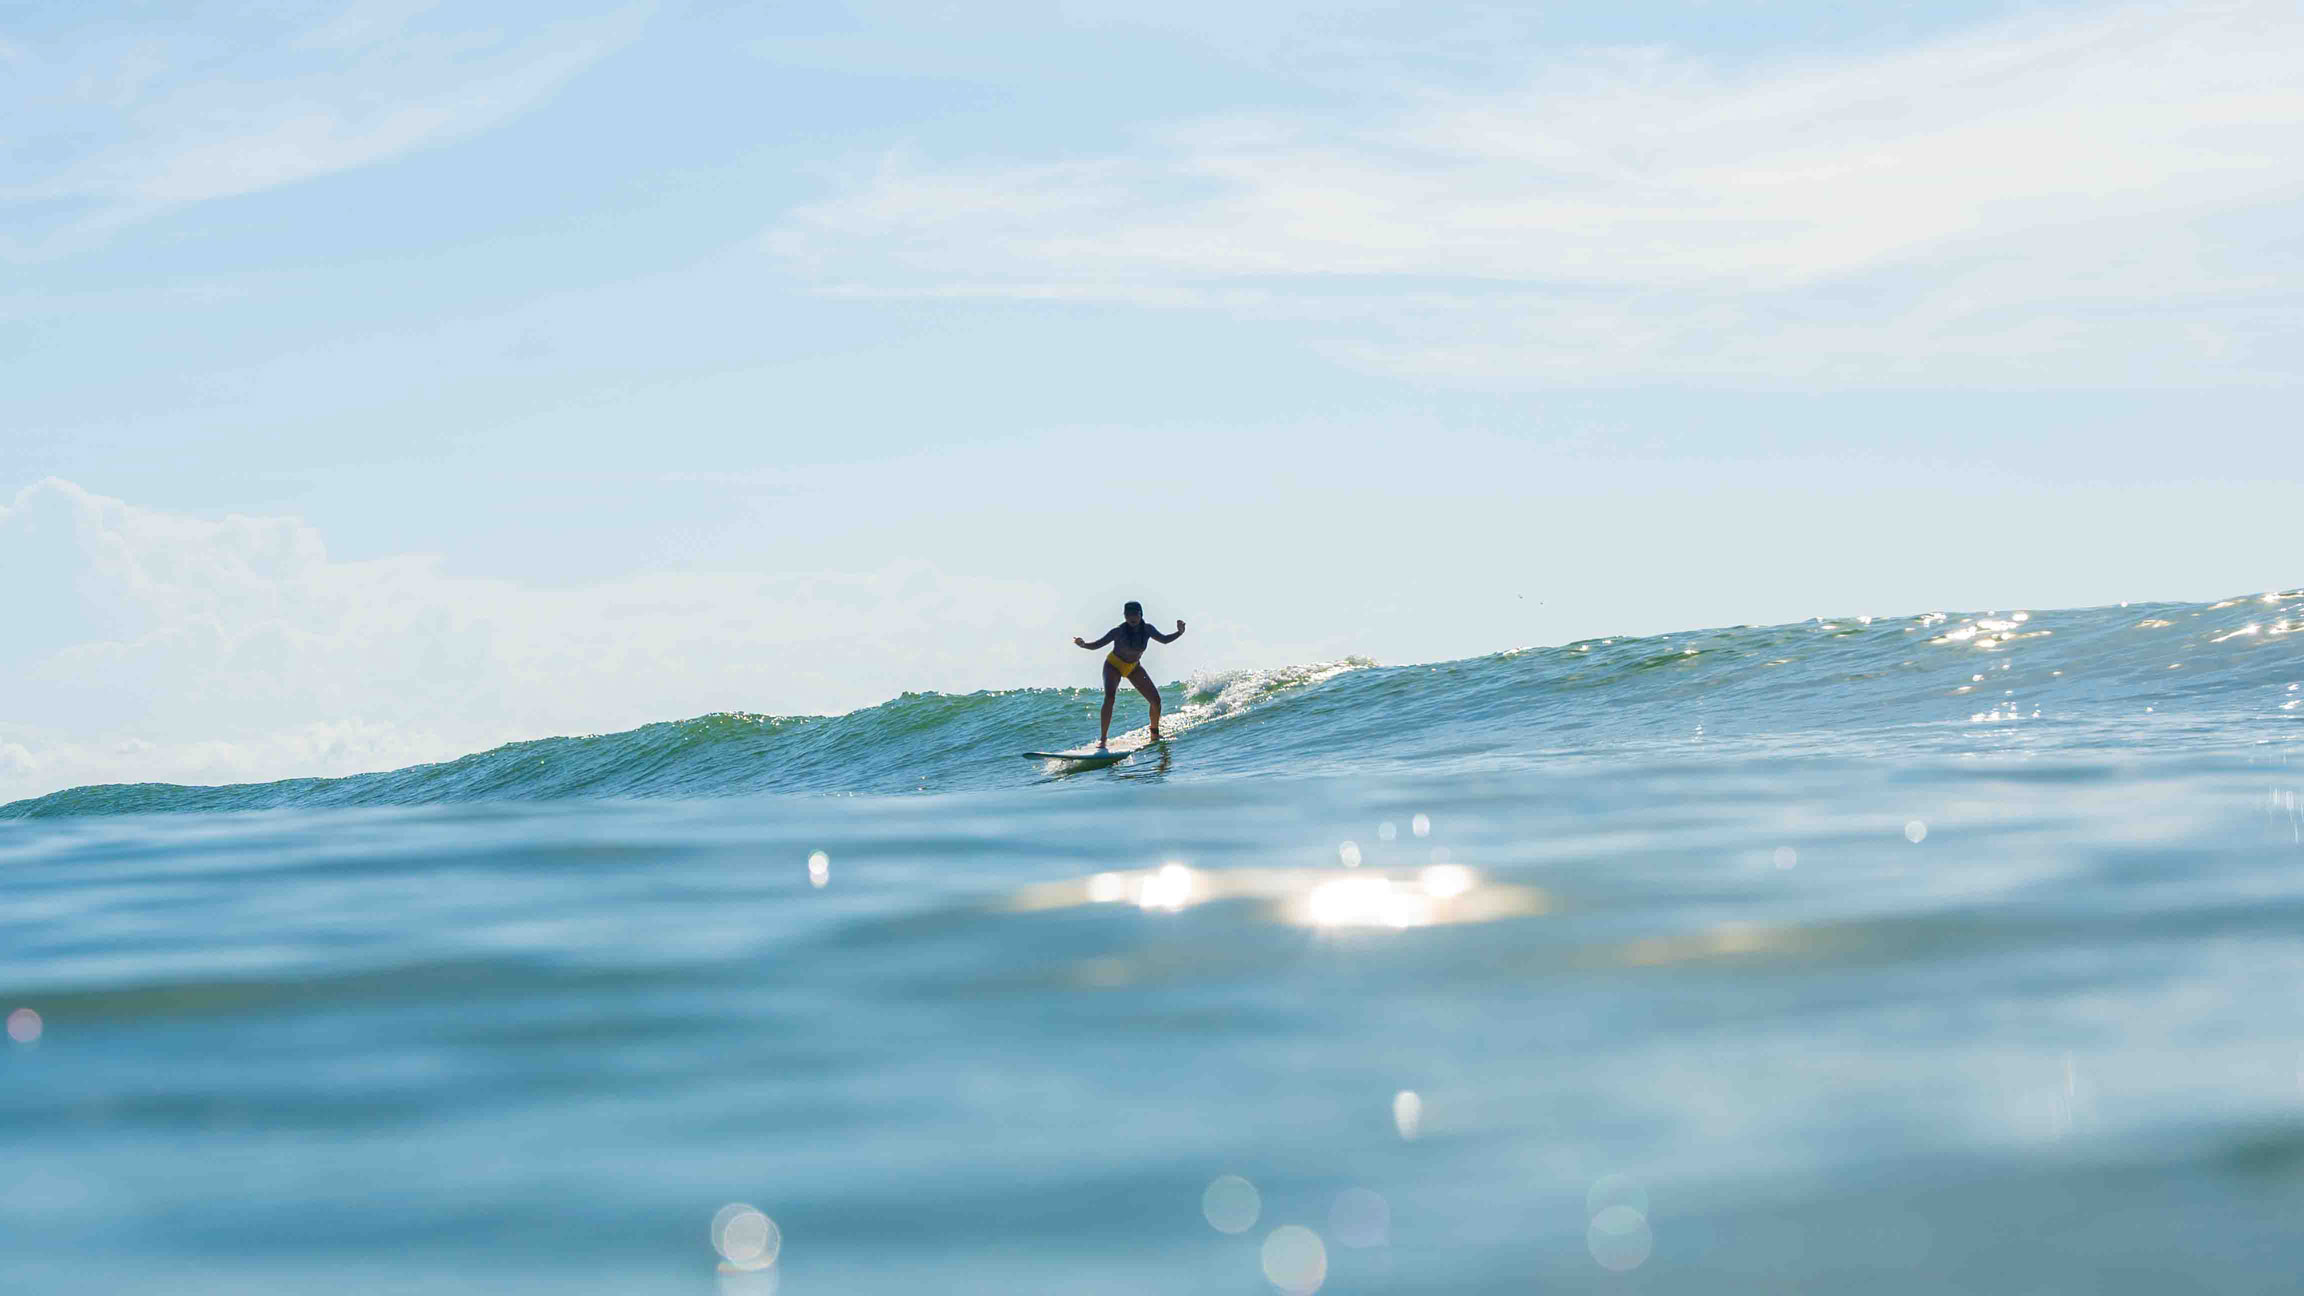 A surfer enhancing flexibility and balance while surfing.